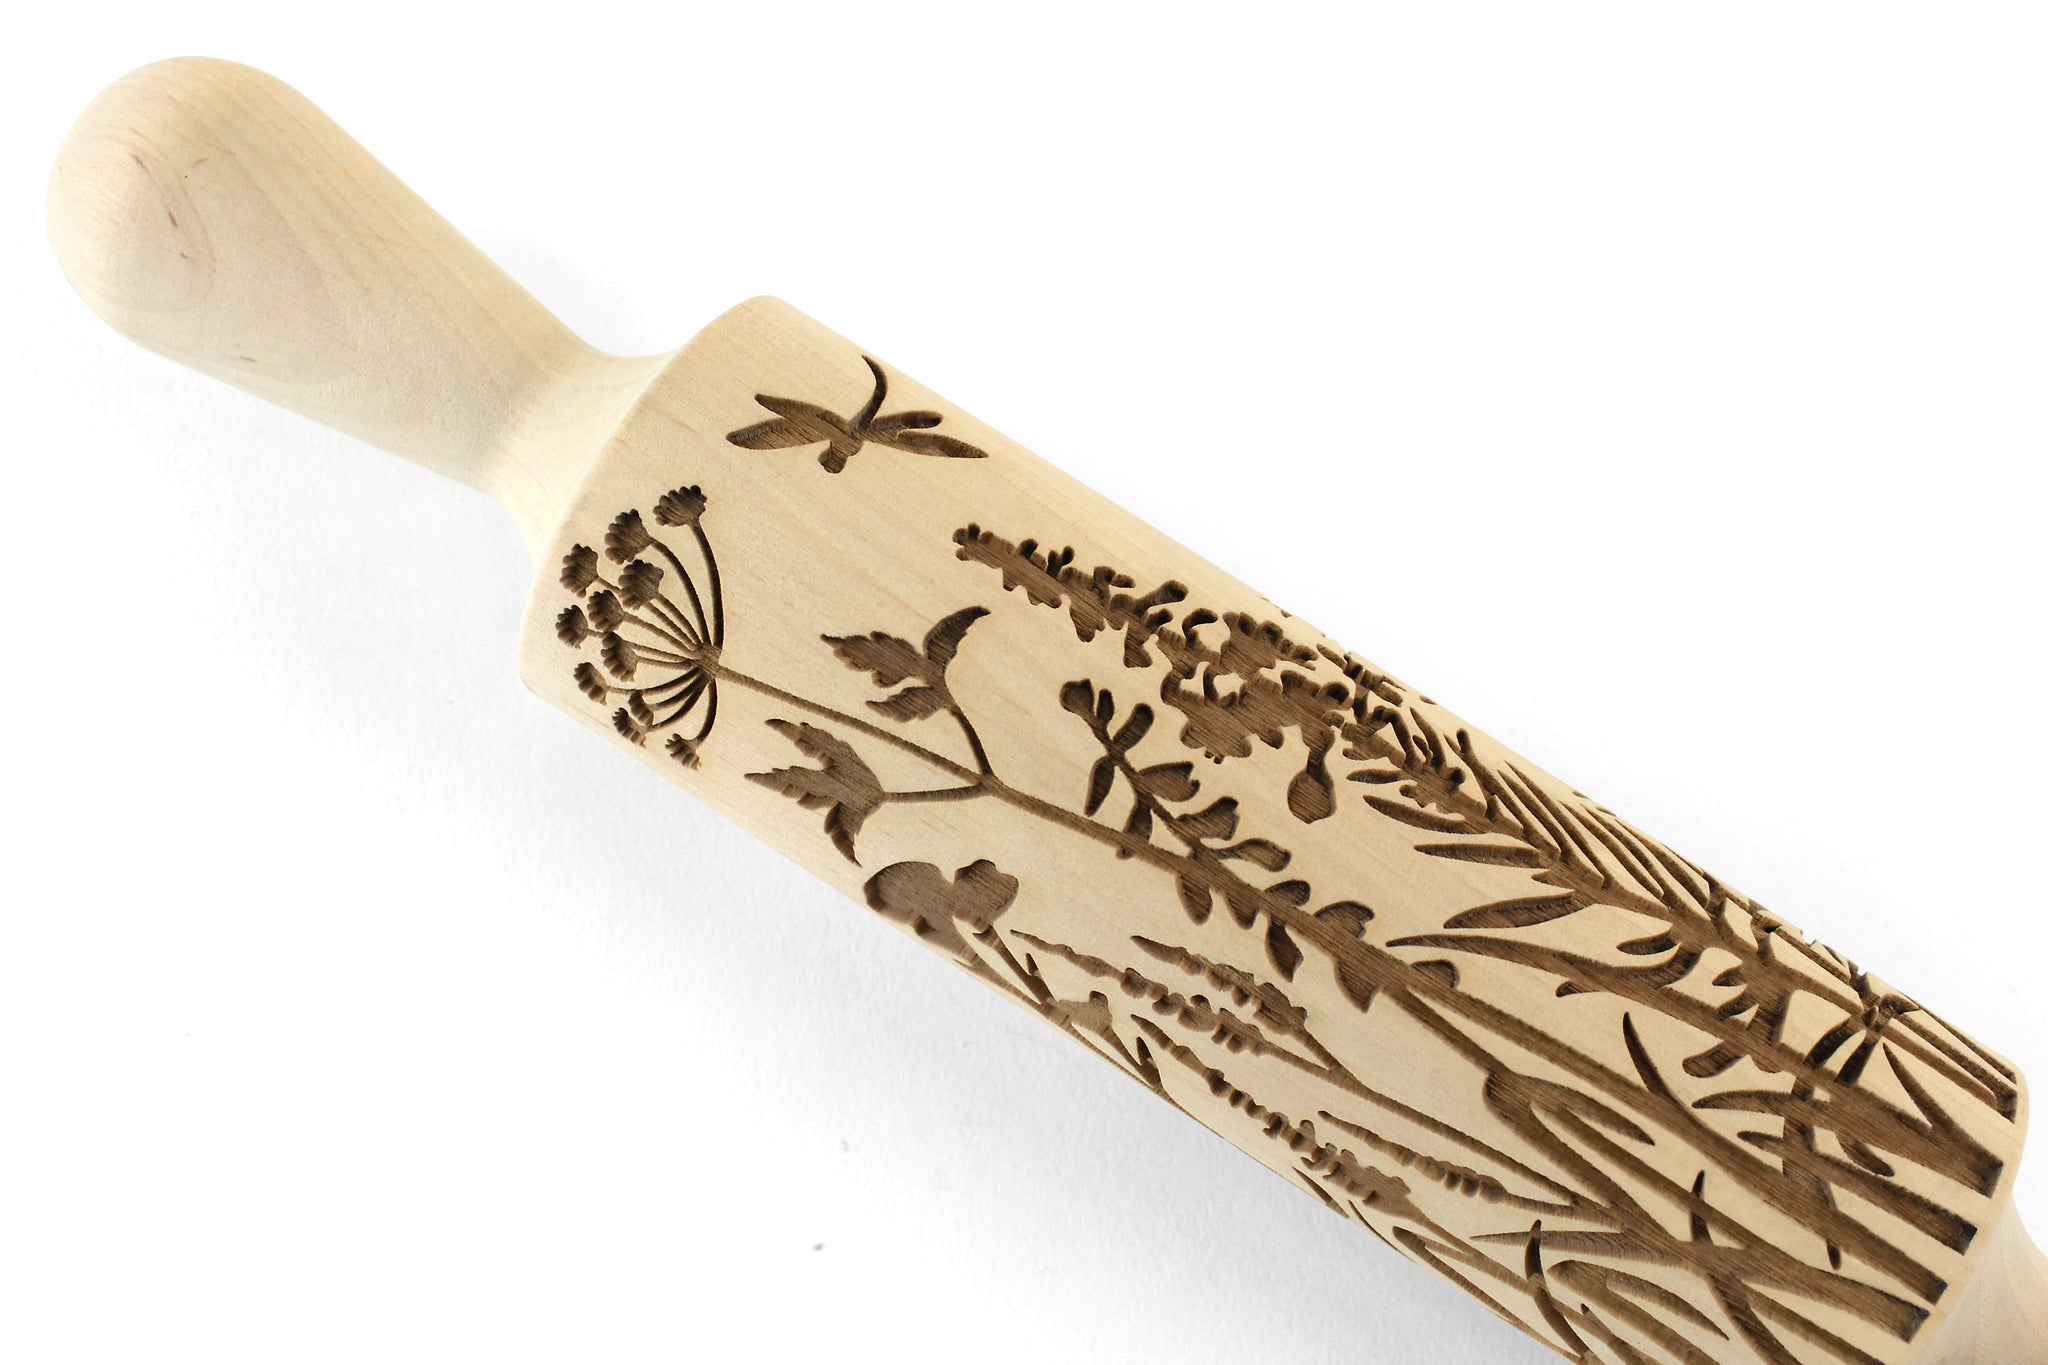 Engraved rolling pin, embossed rolling pin, with flower - Shop